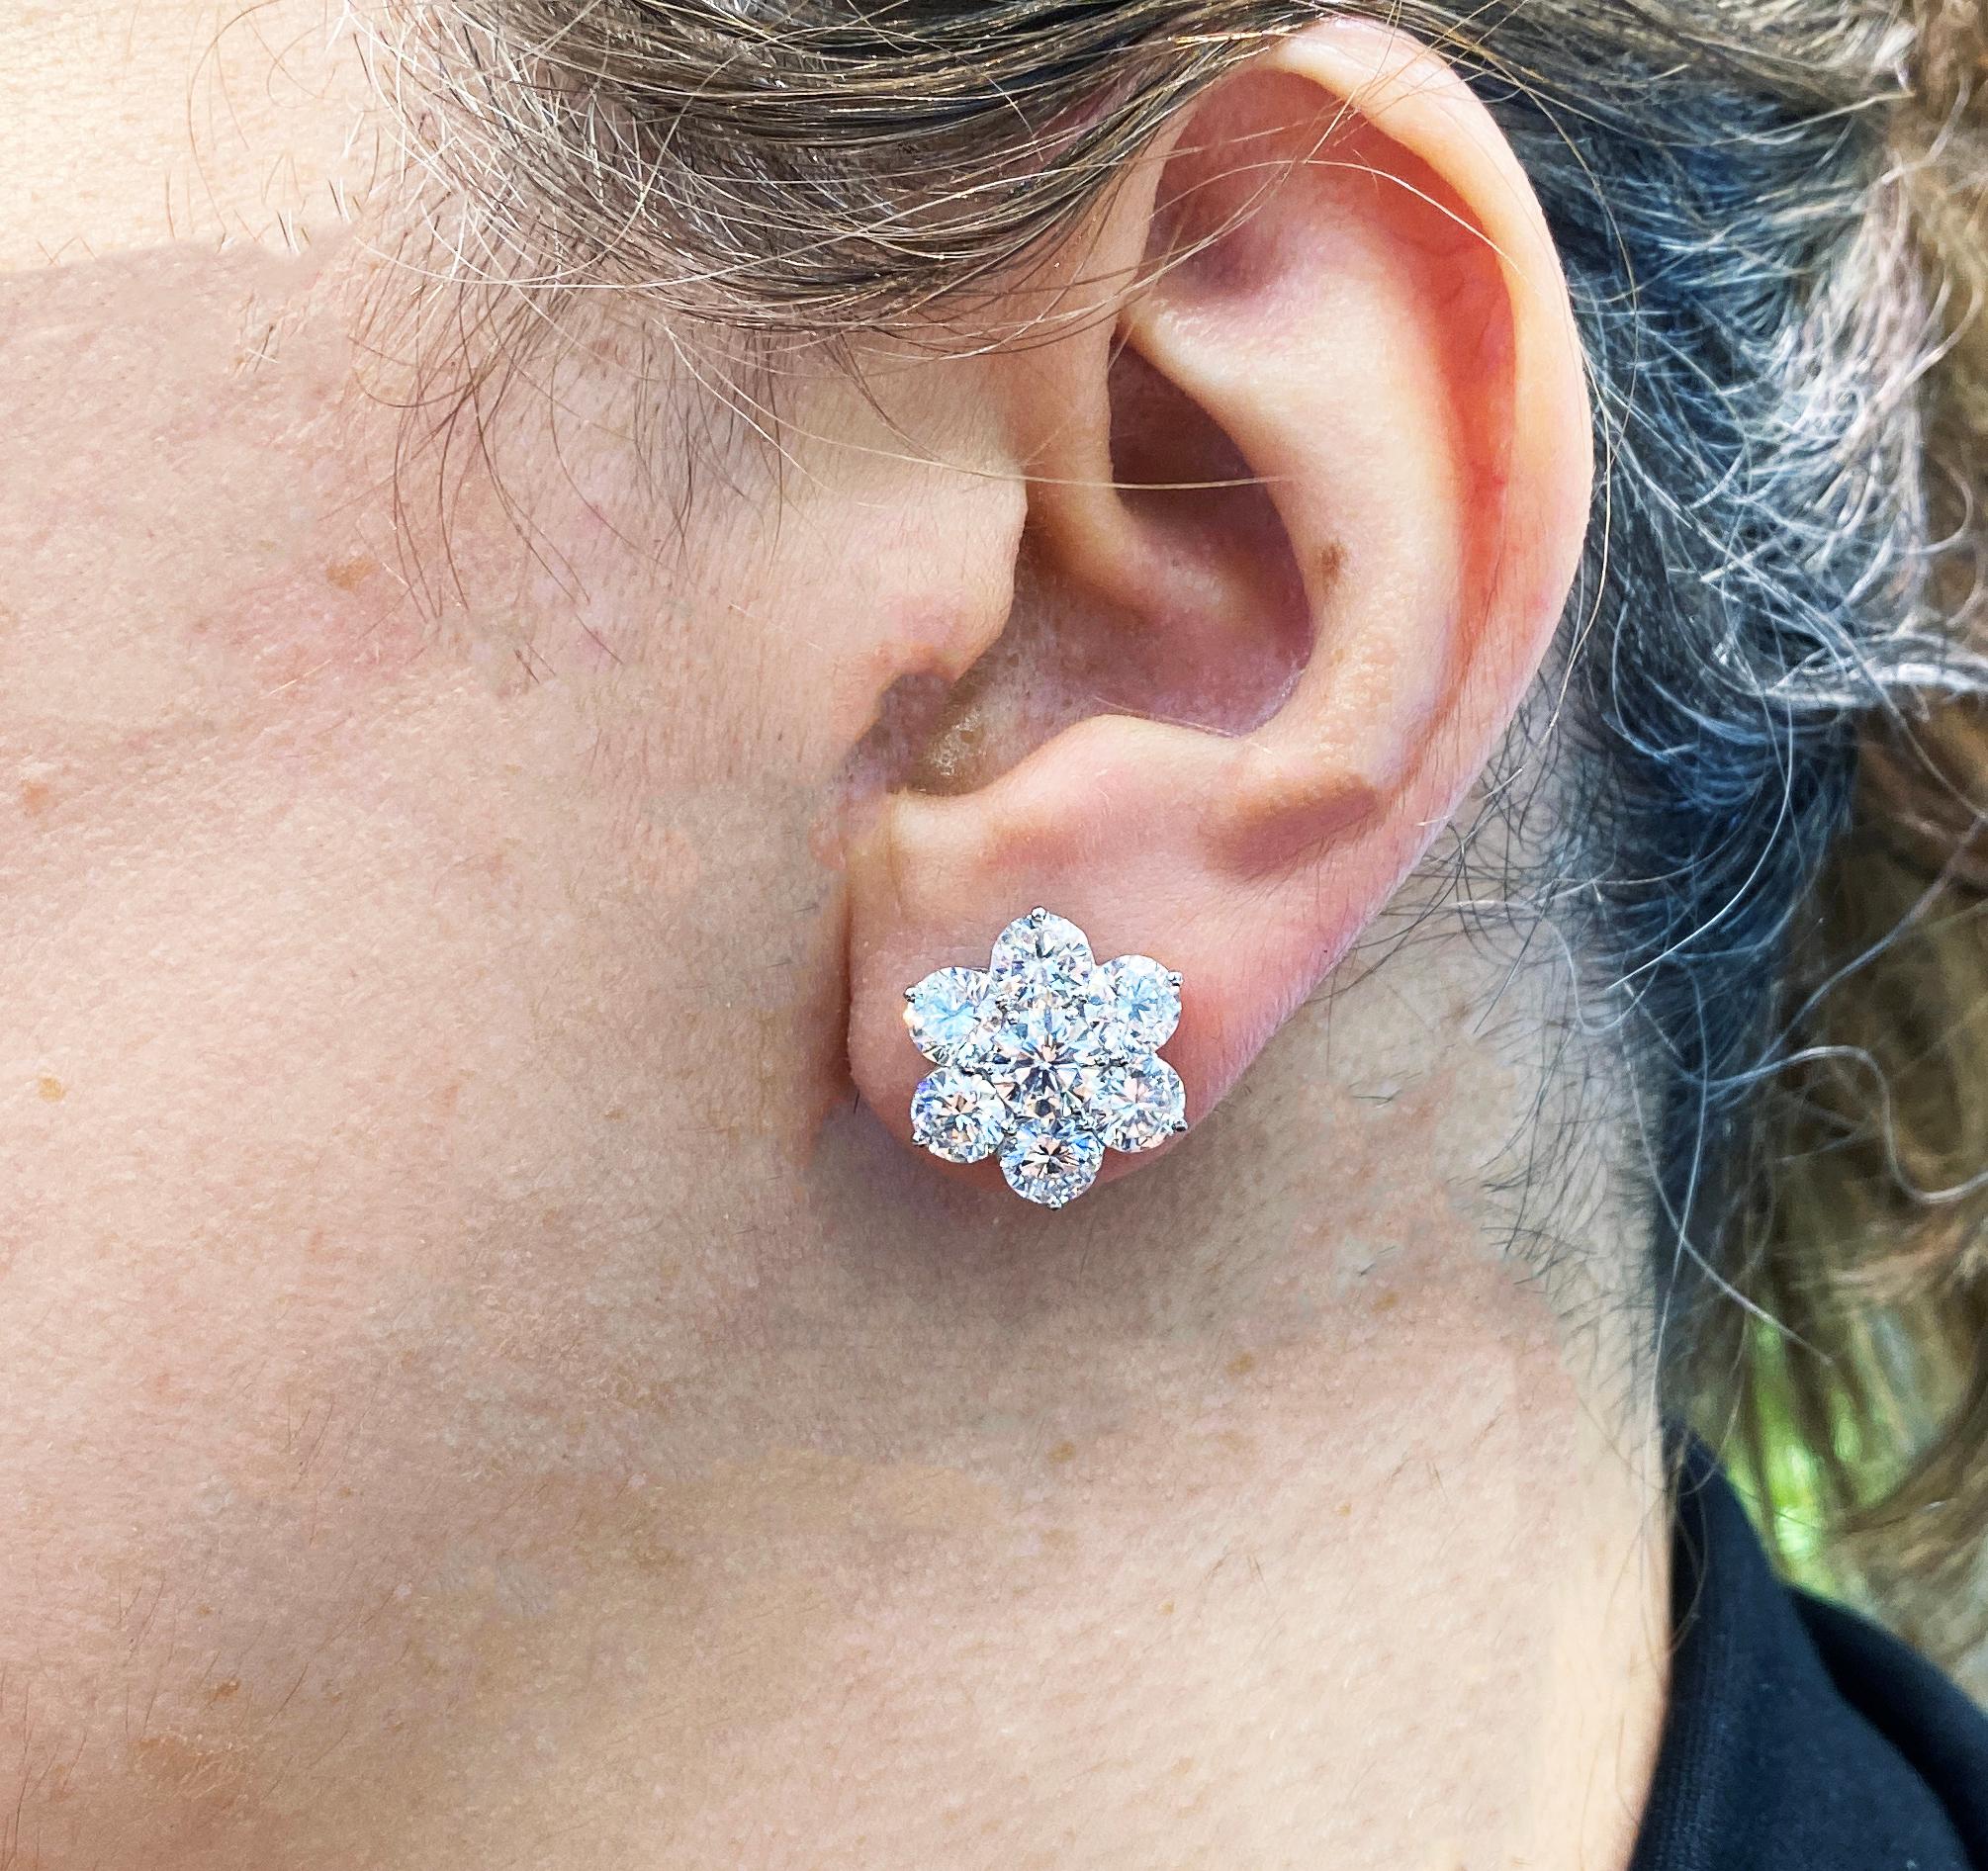 18K White Gold and Diamond Cluster Stud Earrings

These are available in two different sizes. This pair is the large version.

7.84 carat apprx. F-G color, VS1-VS2 clarity

Earrings are 0.70 inch width.